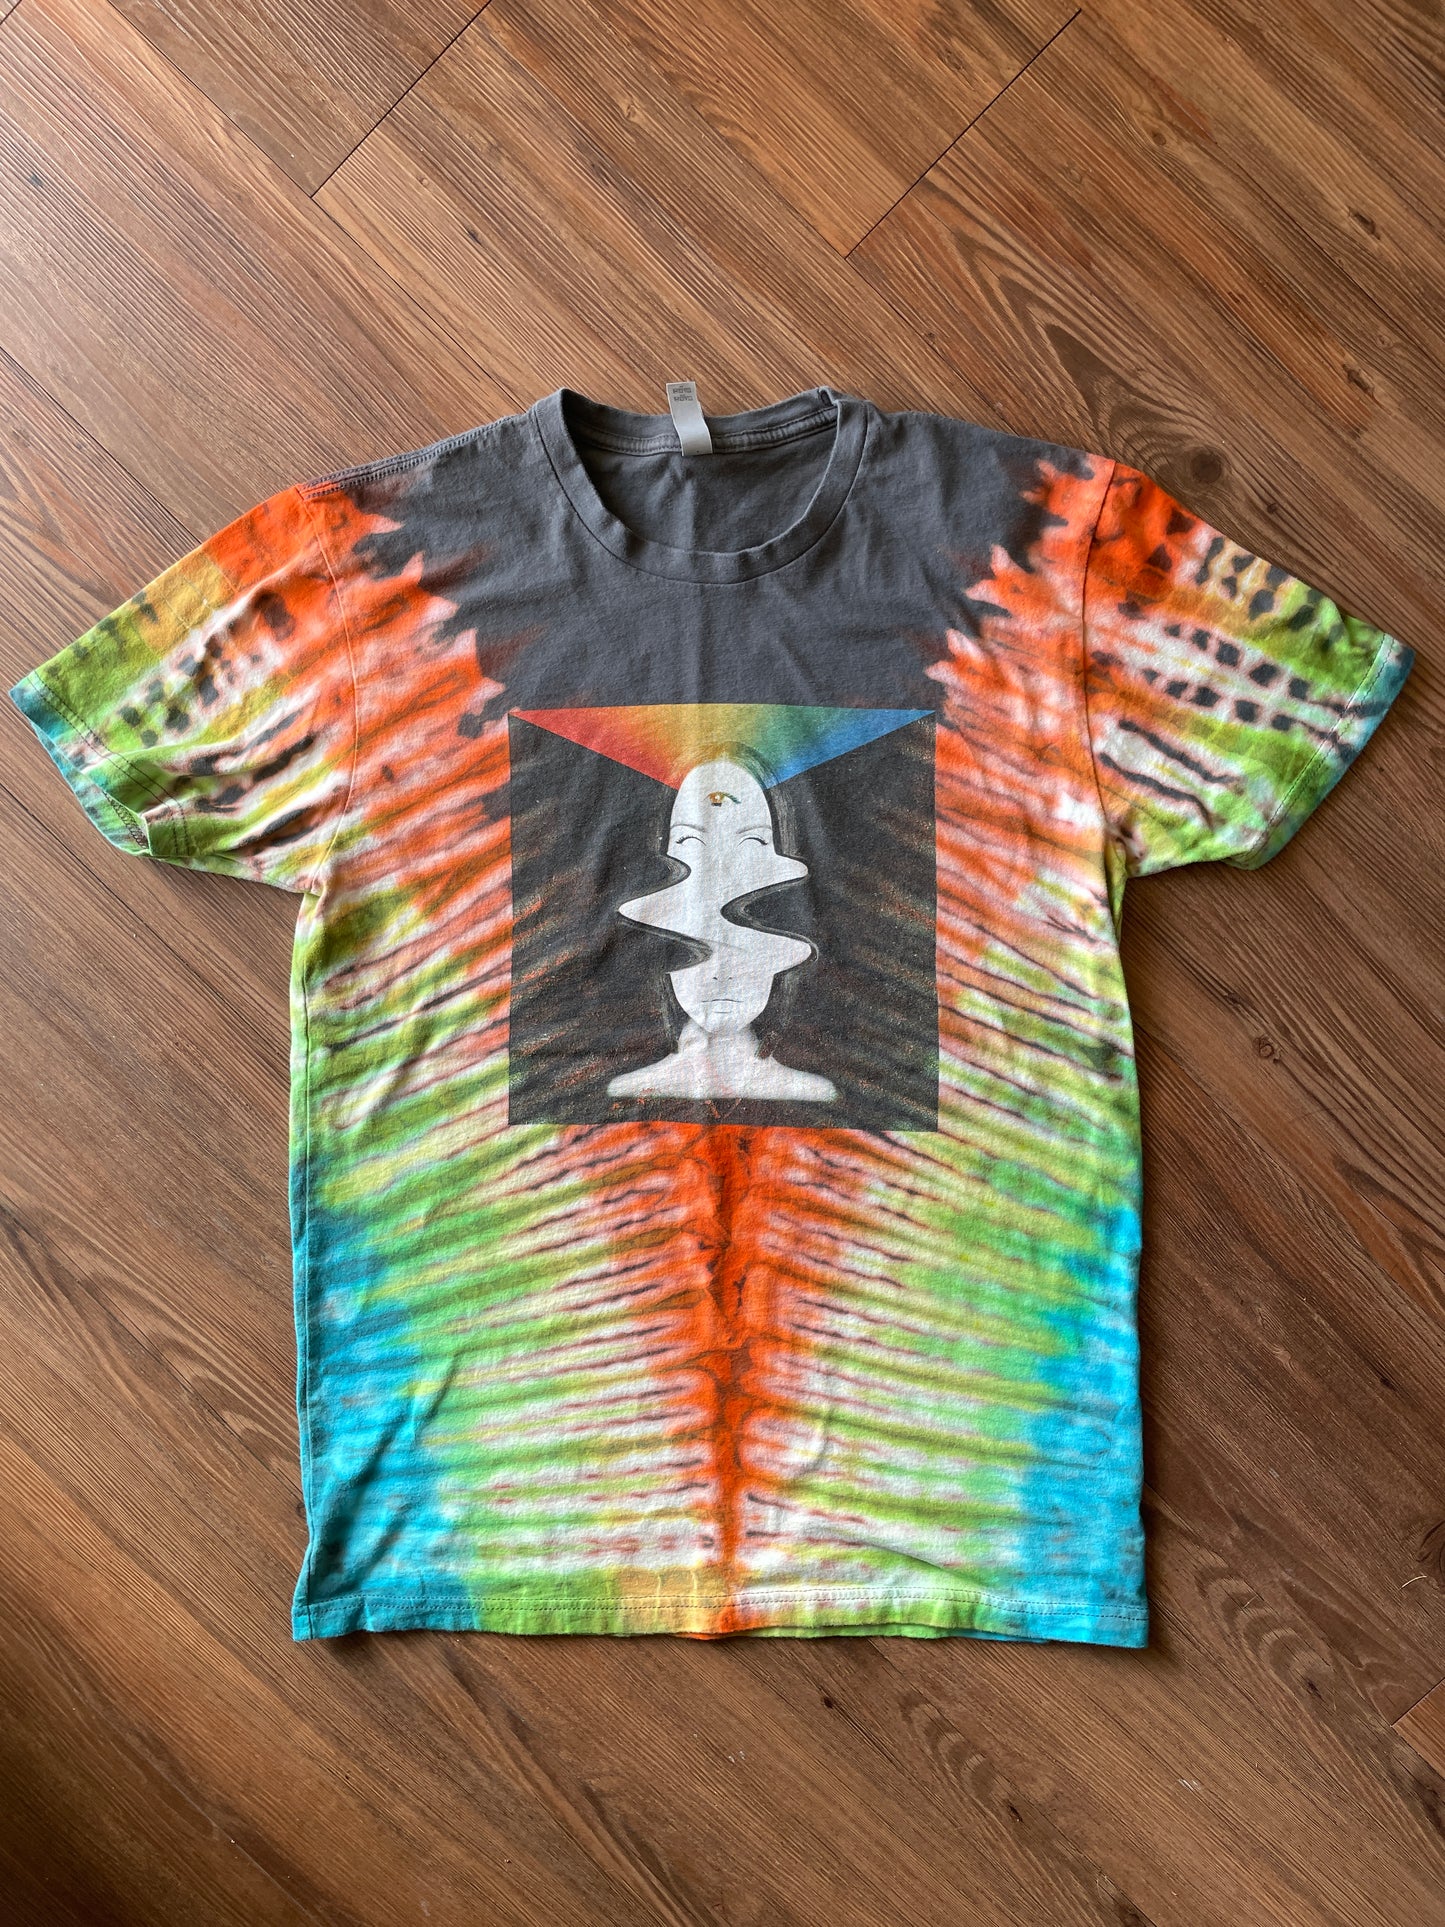 MEDIUM Men’s Psychedelic Lady Head Handmade Tie Dye T-Shirt | One-Of-a-Kind Neon Orange and Gray Short Sleeve